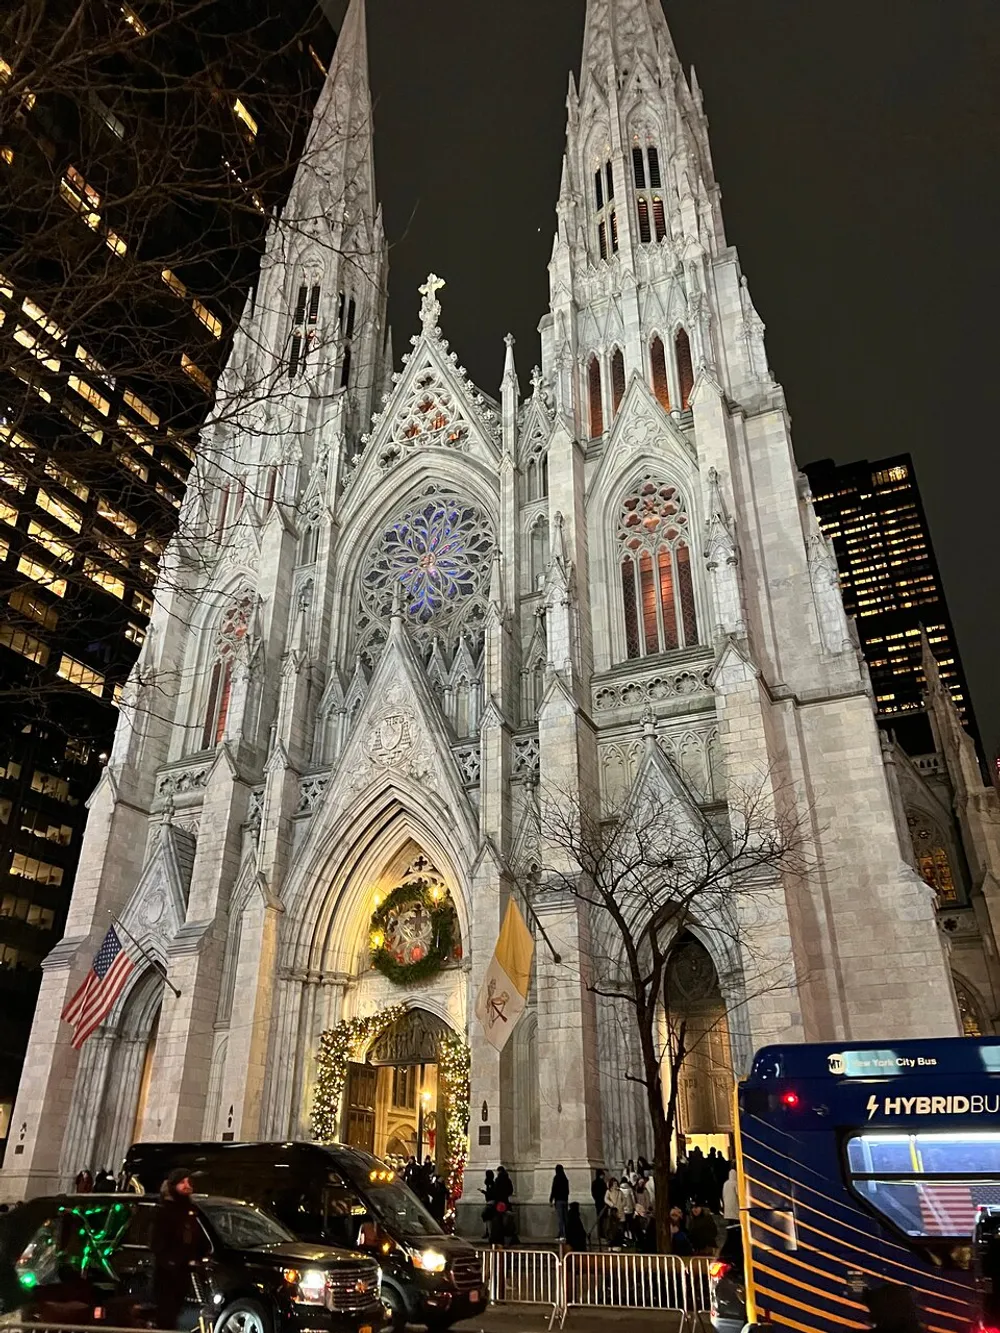 The image captures a grand Gothic cathedral illuminated at night adorned with a large wreath and festive decorations as traffic and pedestrians navigate the bustling street alongside it